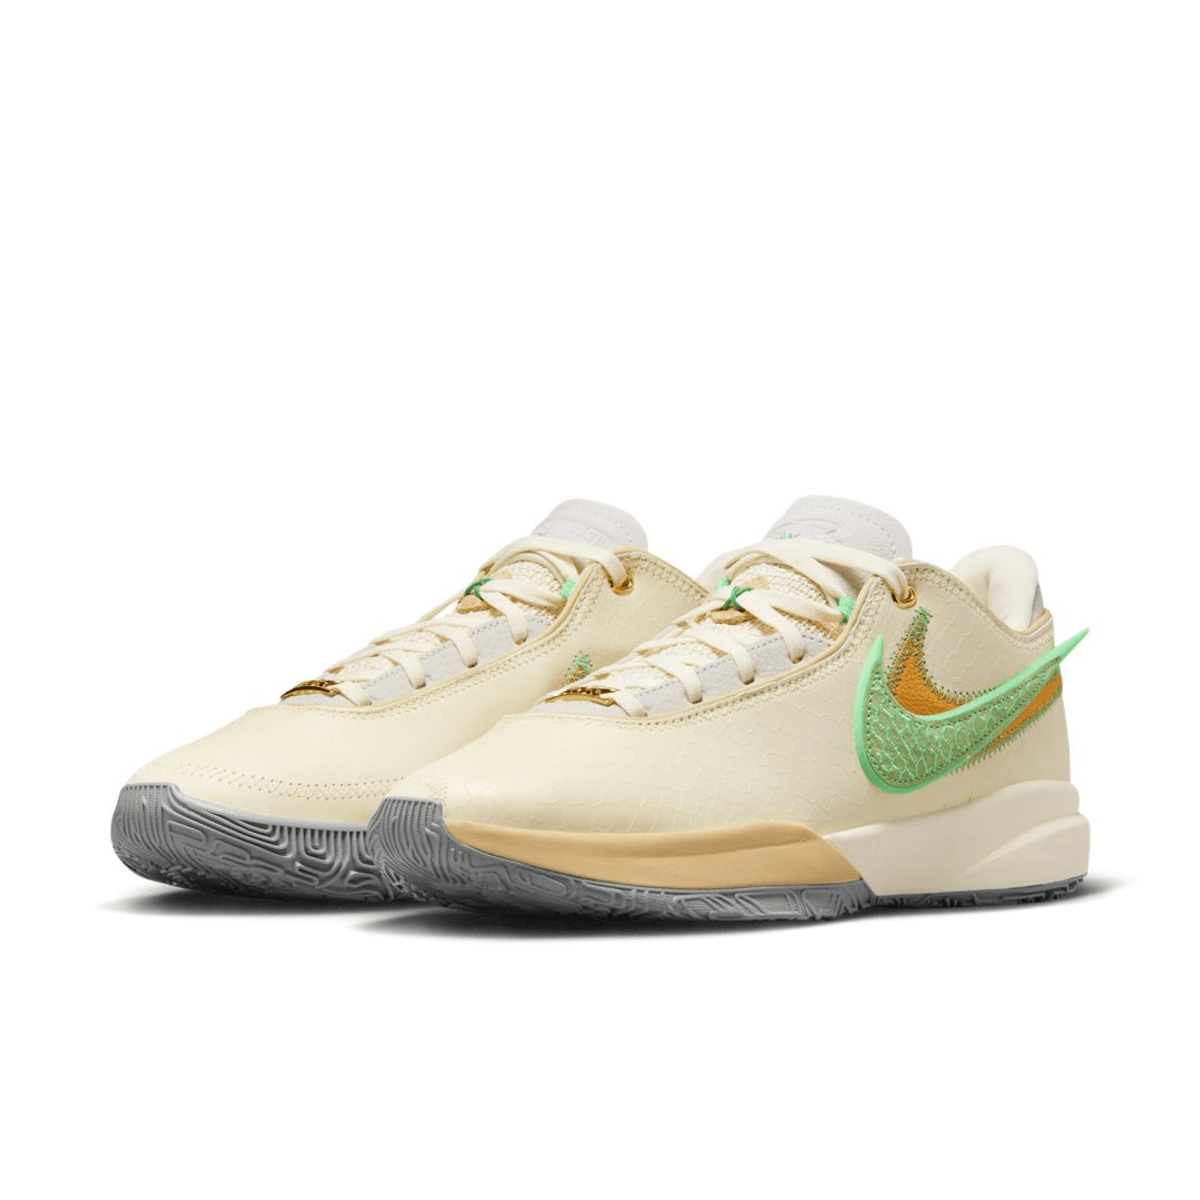 Nike x APB x FAMU LeBron 20 "Coconut Milk" Ready To Drop As Part Of 2-Pack Collection